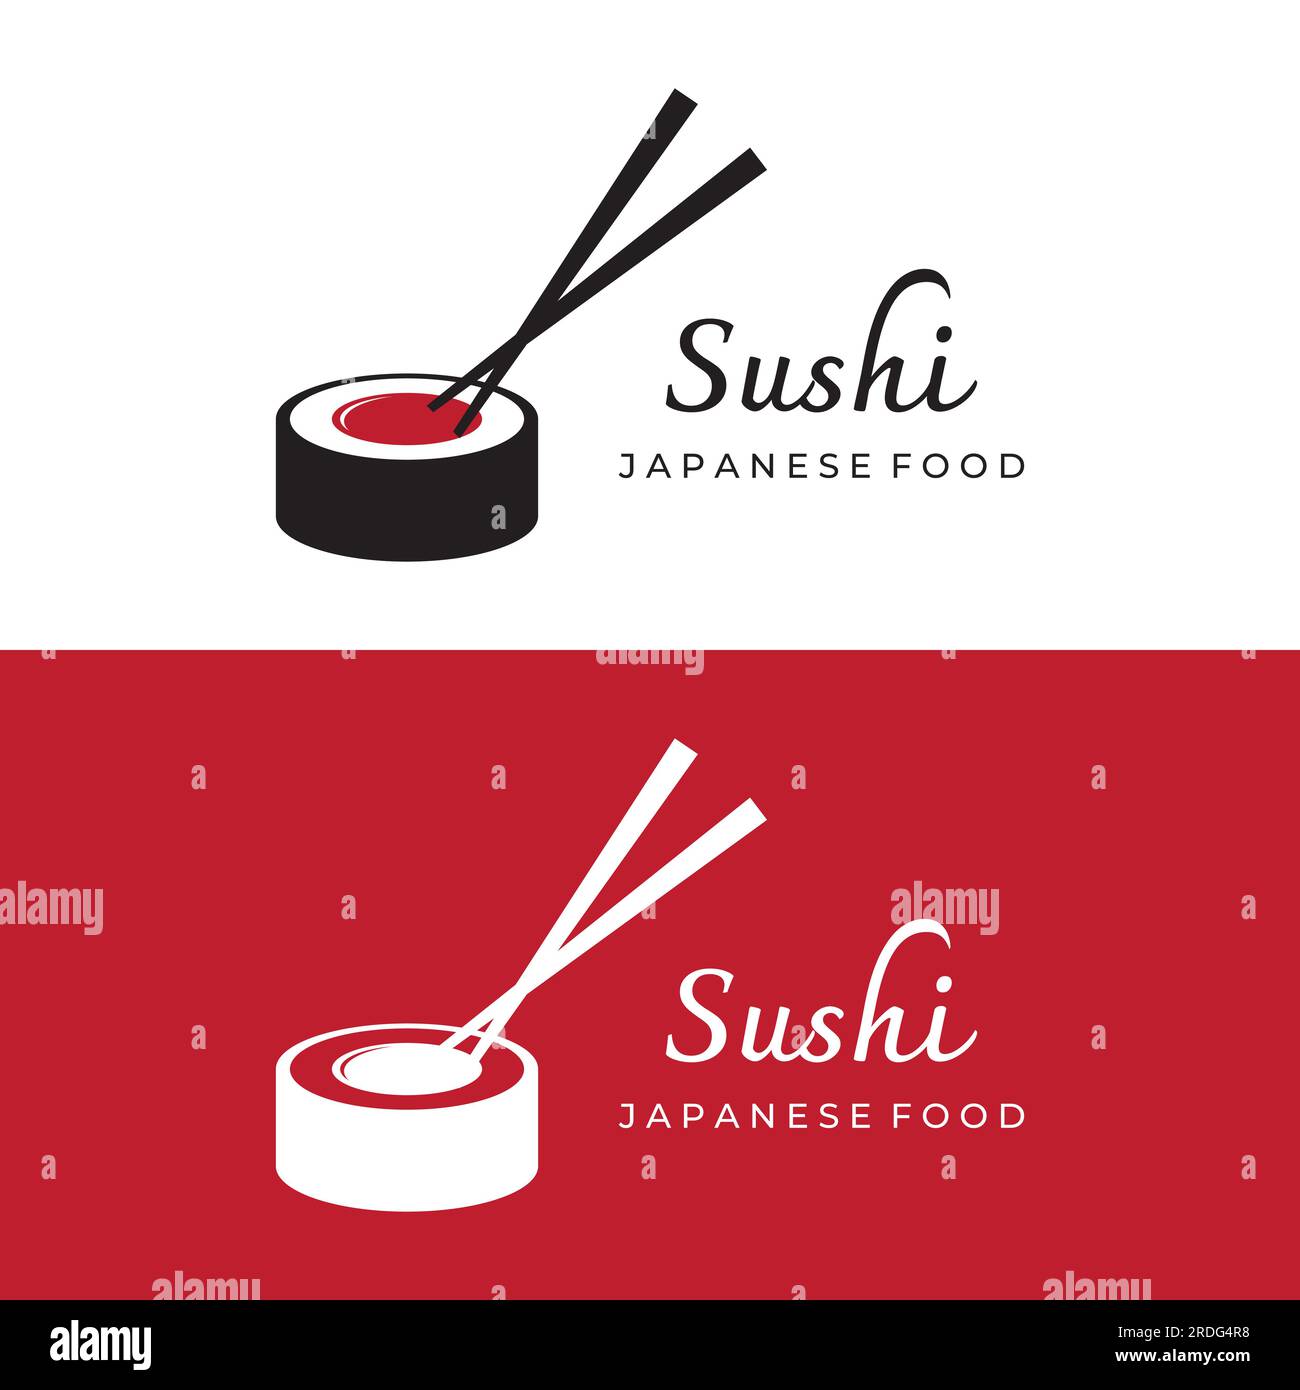 Sushi logo template.Seafood or traditional japanese cuisine with salmon, delicious food.Logo for Japanese restaurant, bar, sushi shop. Stock Vector